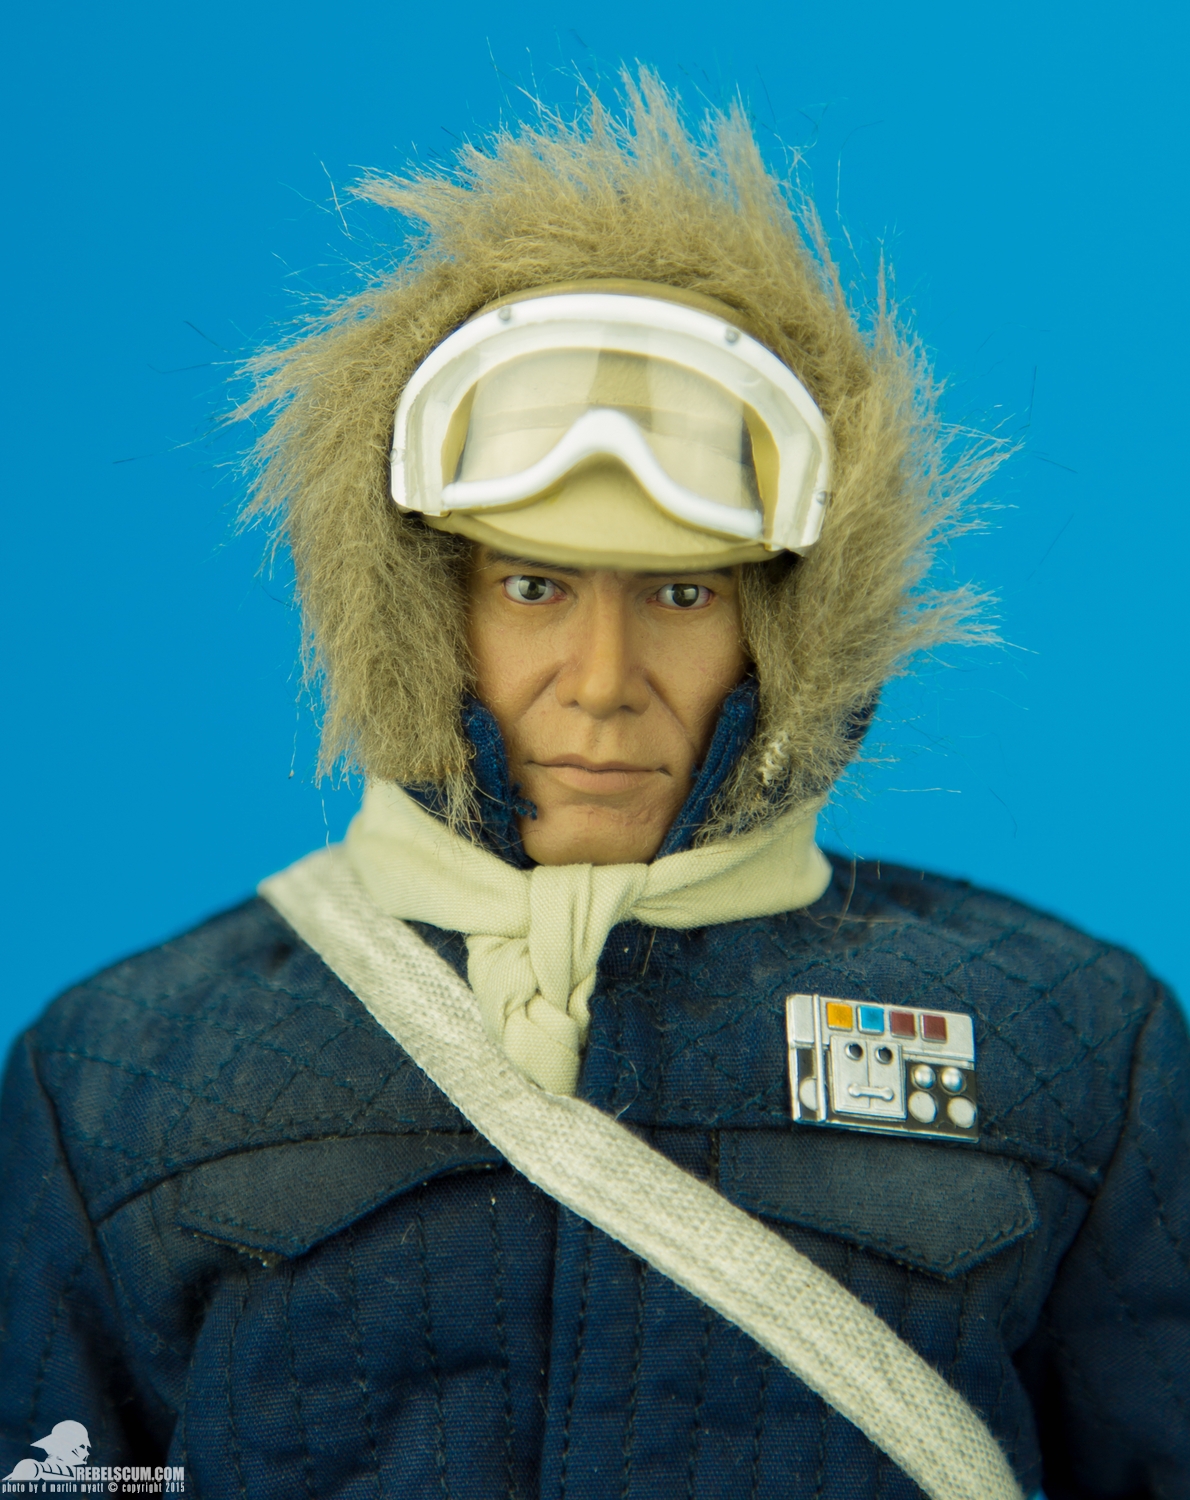 Han-Solo-Hoth-Blue-Sixth-Scale-Sideshow-Collectibles-Star-Wars-005.jpg